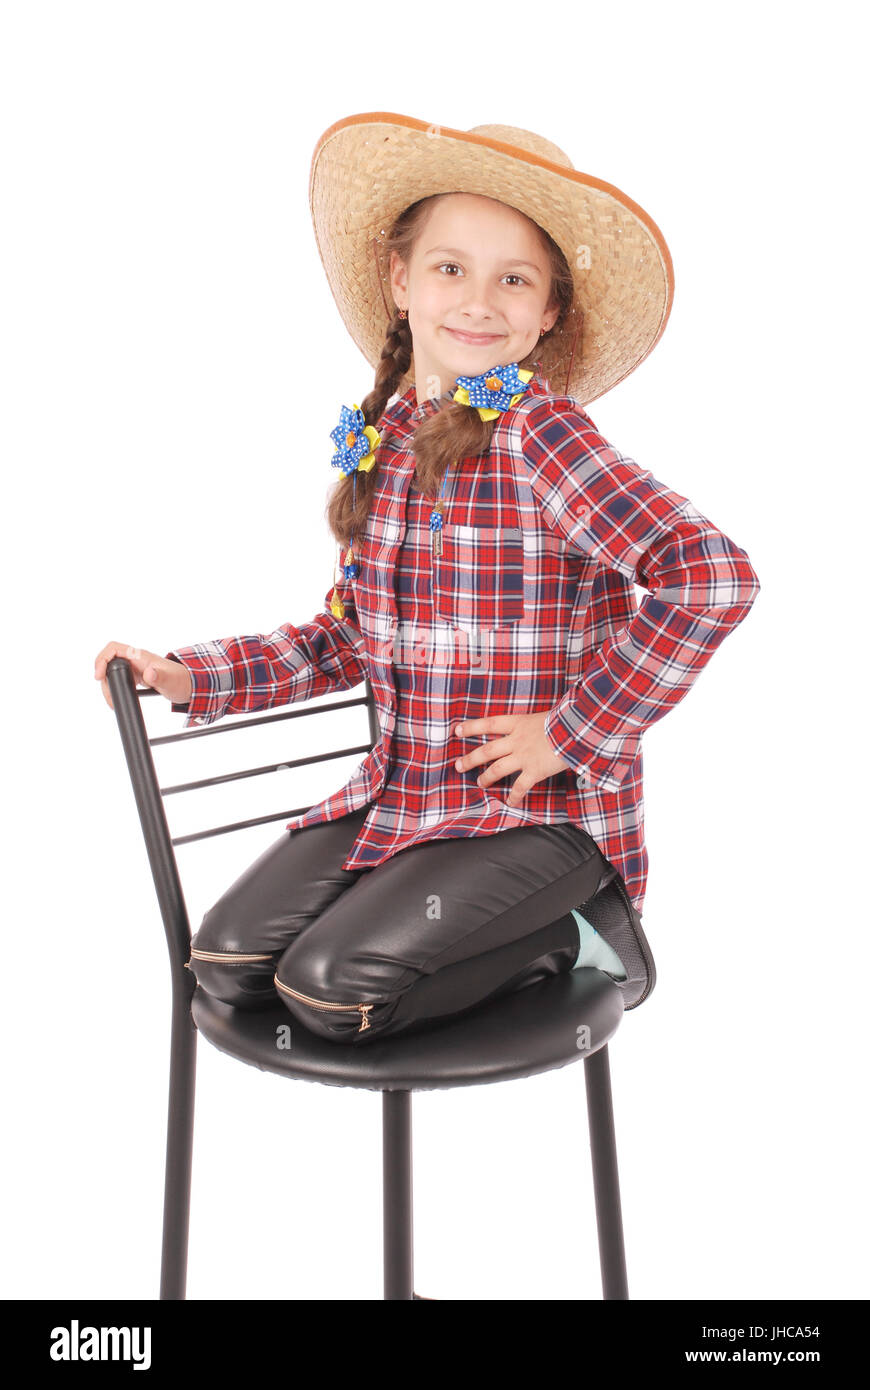 Portrait of adorable smiling little girl sitting on a chair with her hat,  isolated on a white background with soft shadow Stock Photo